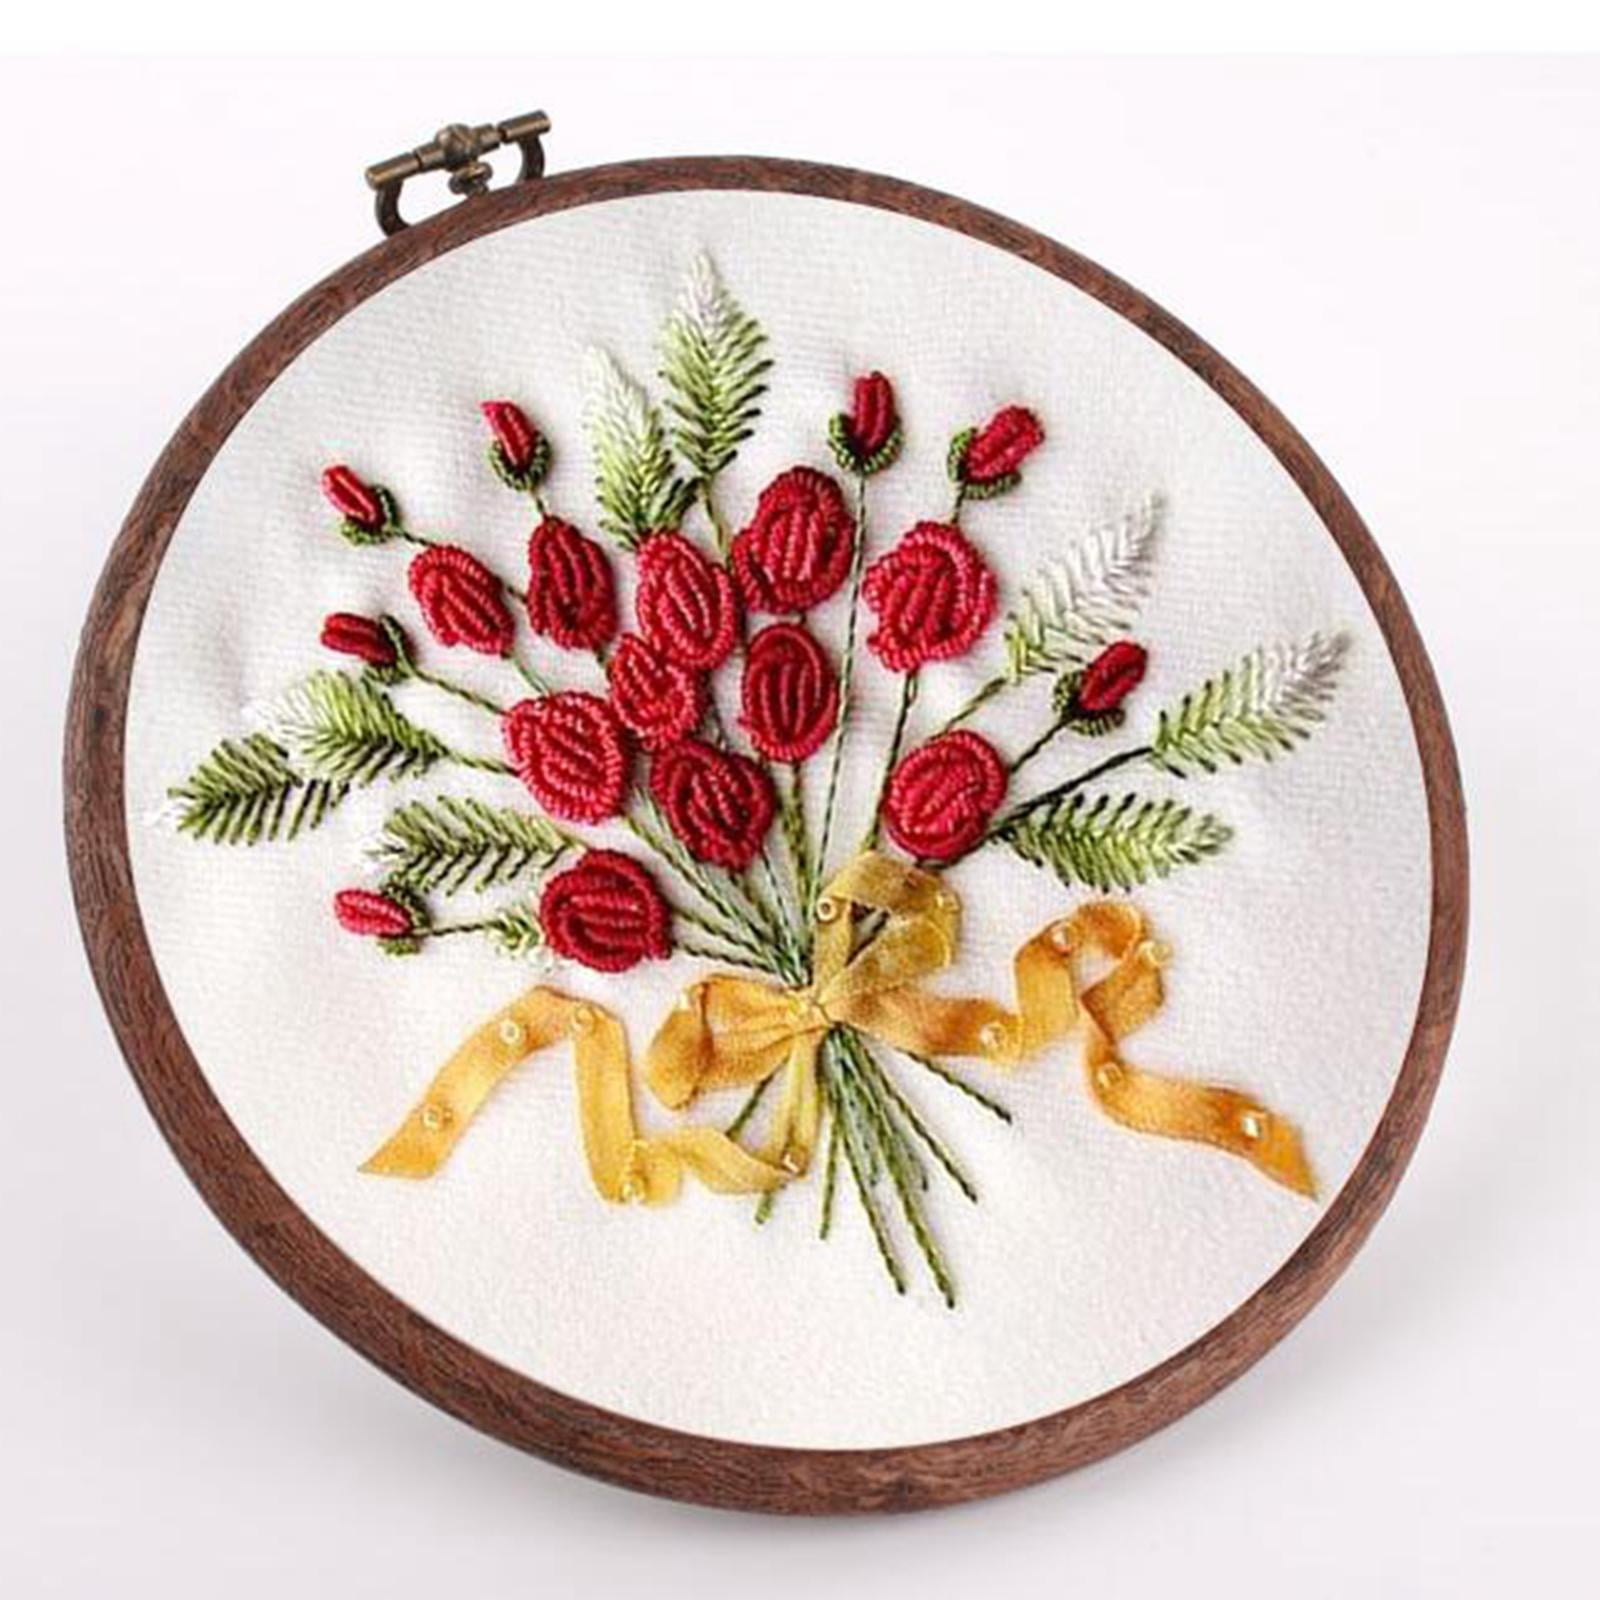 6 x 6 Square Embroidery Hoop - Needlework Projects, Tools